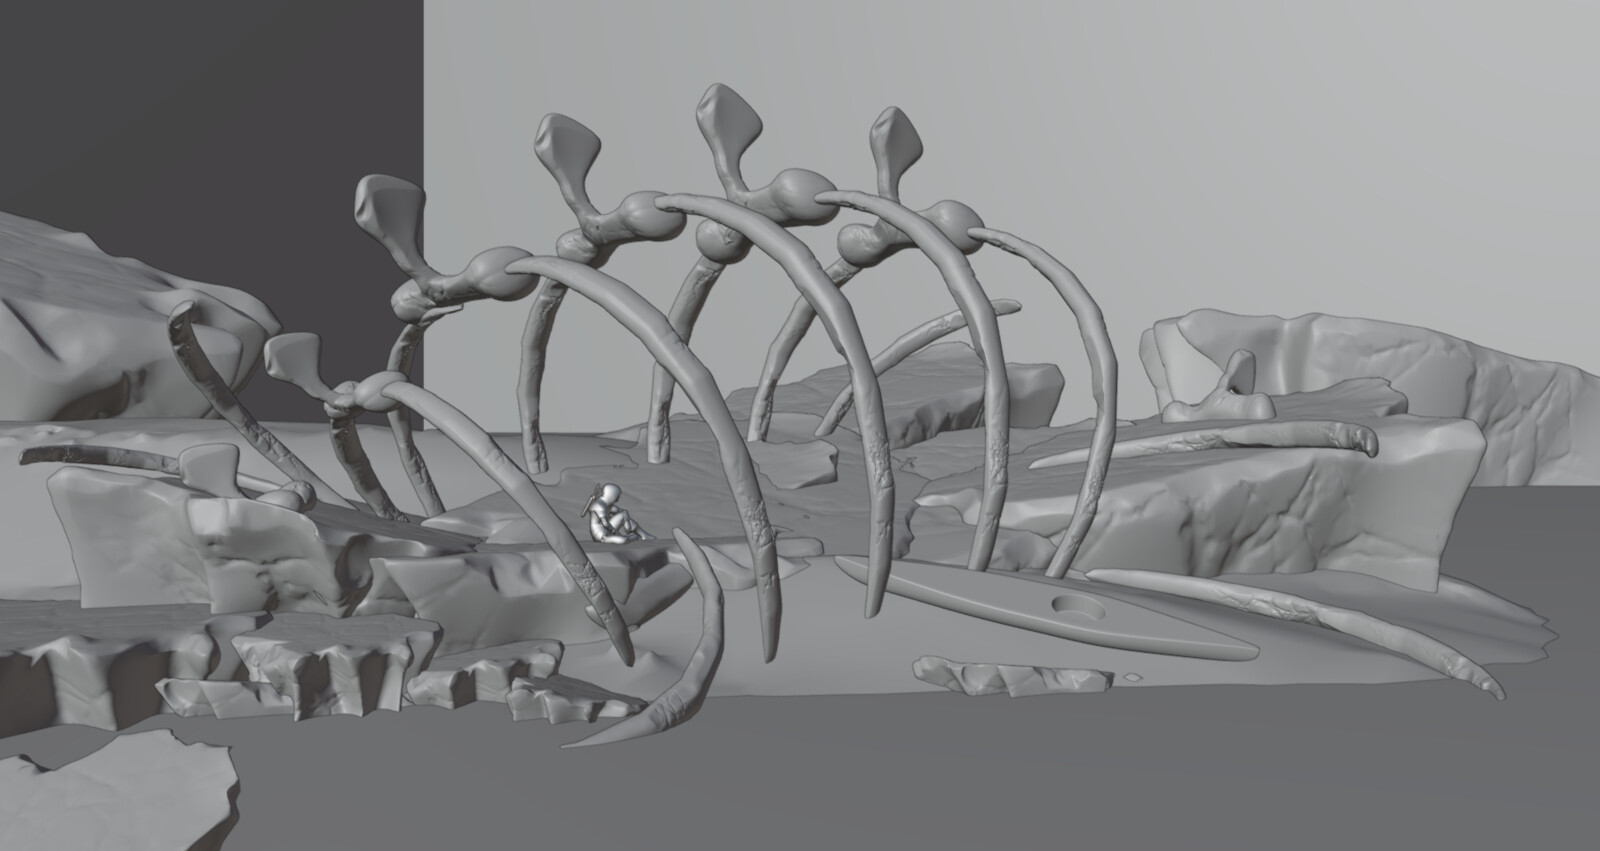 Blender viewport, the bones and ice sheets are sculpted, supplemented with some assets from Megascans